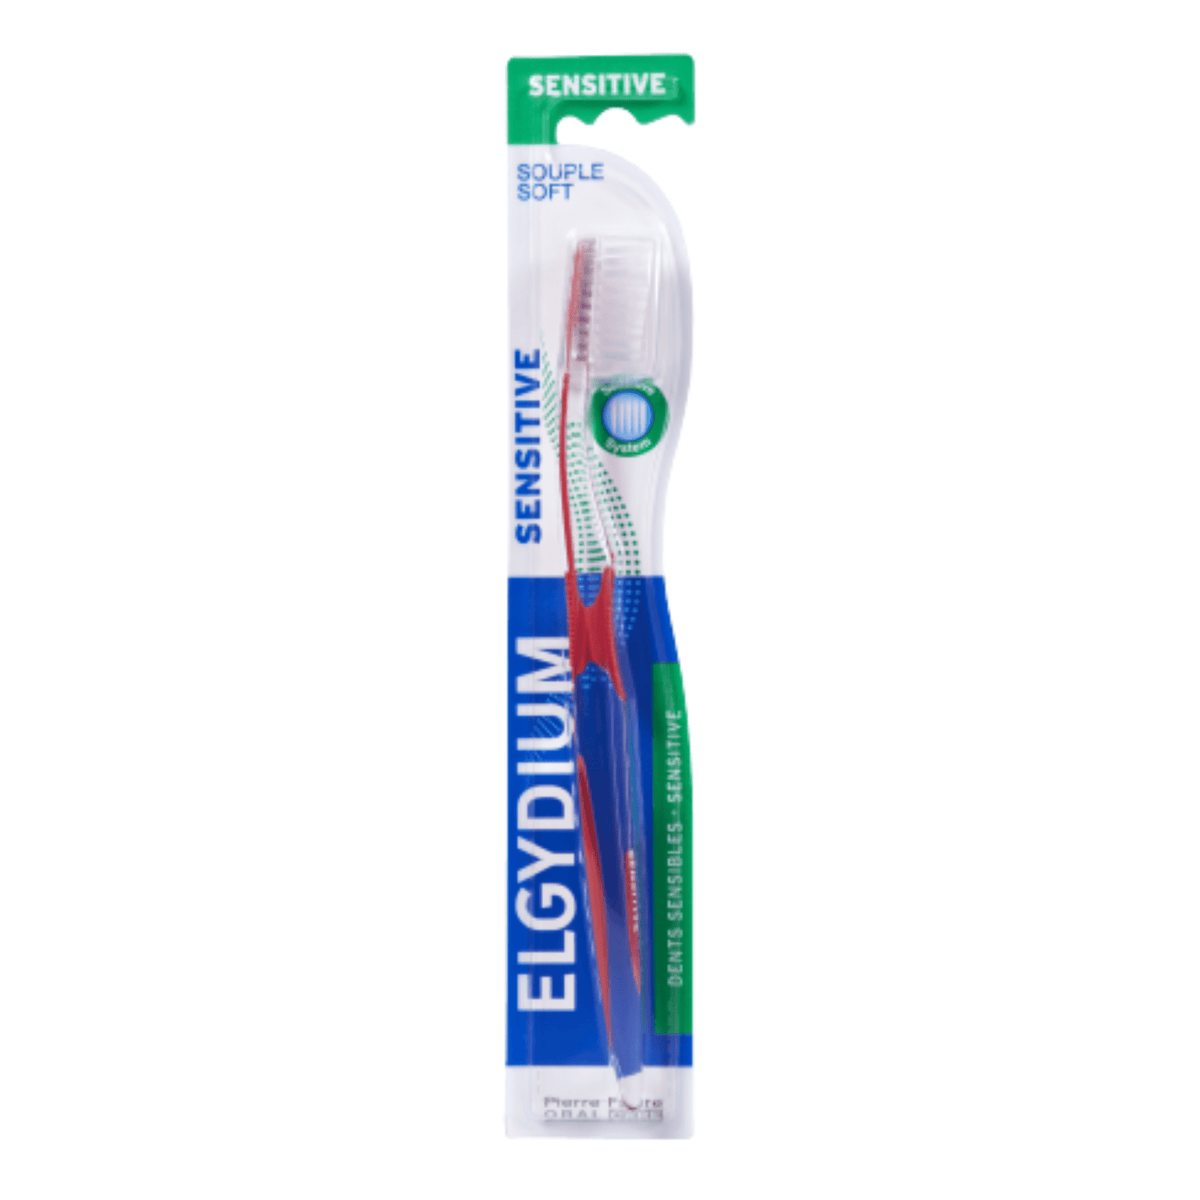 Primary Image of Sensitive Soft ToothBrush - Assorted Colors